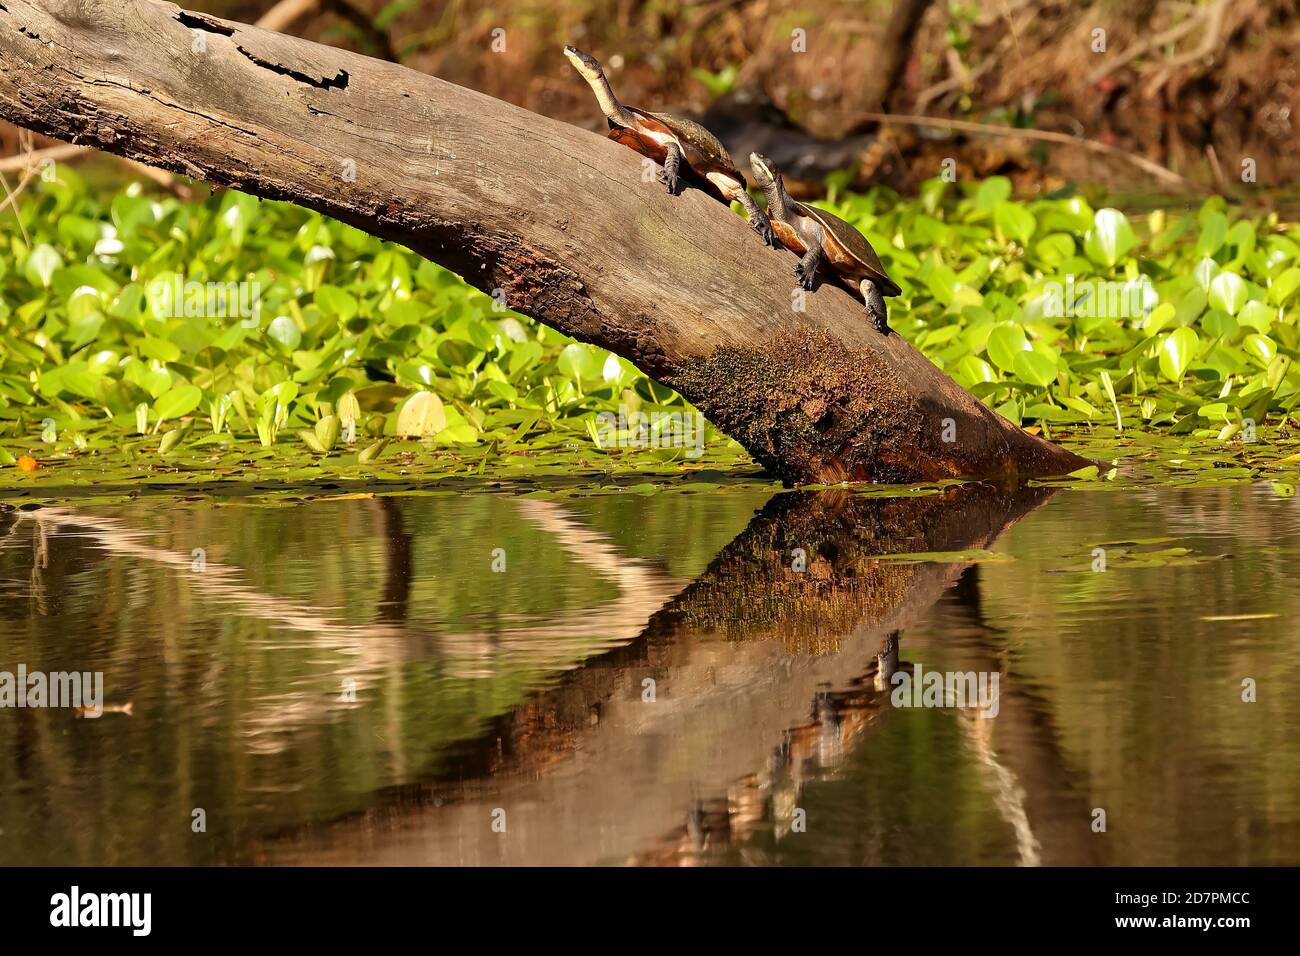 Eastern Long-necked and Murray River Turtle basking on a river log Stock Photo